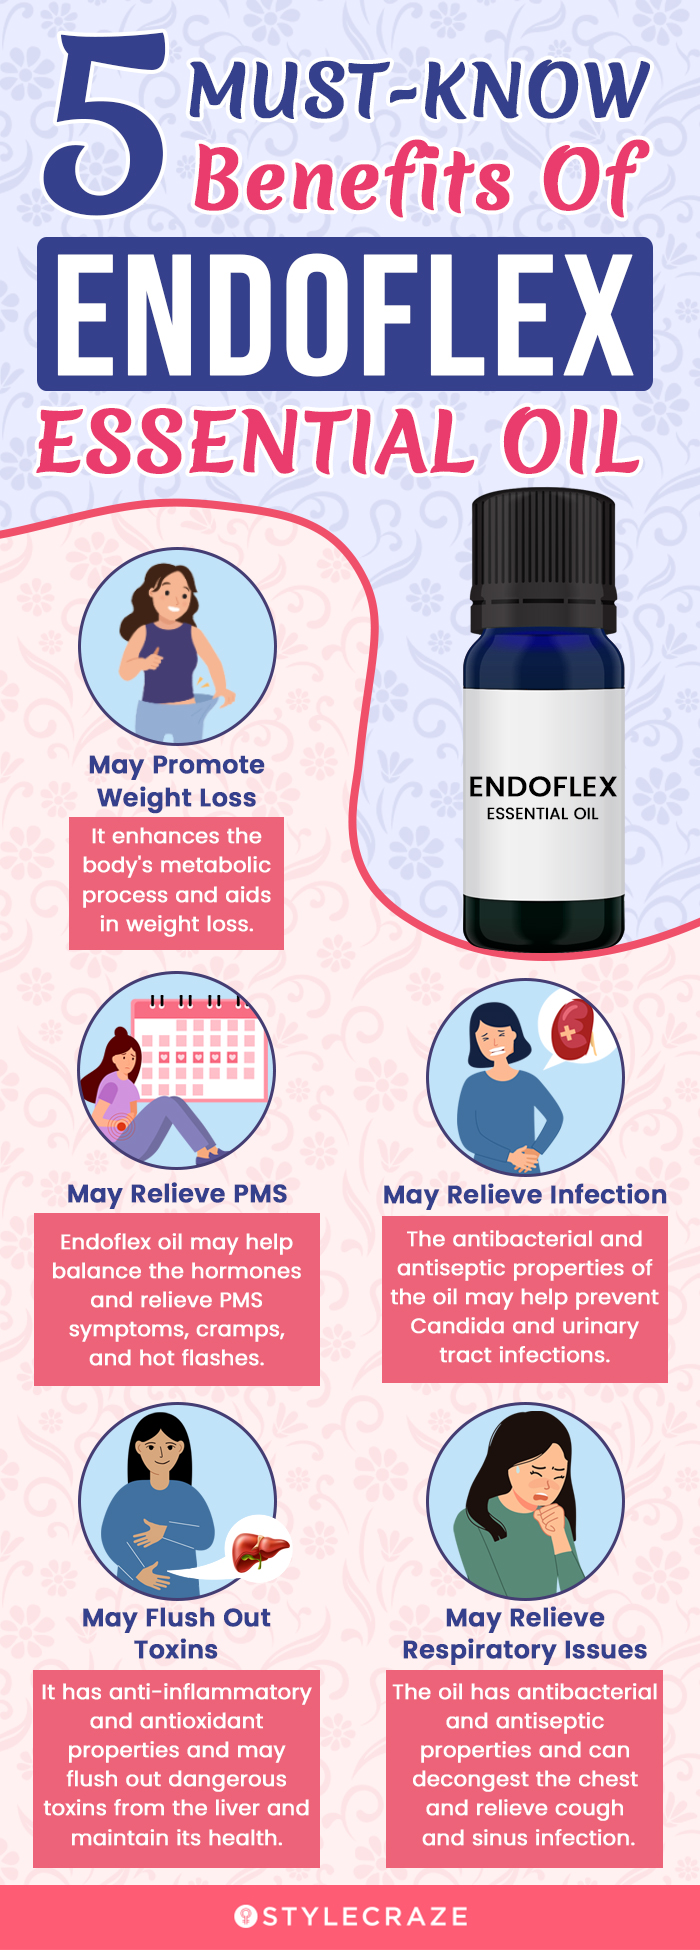 5 must know benefits of endoflex essential oil (infographic)